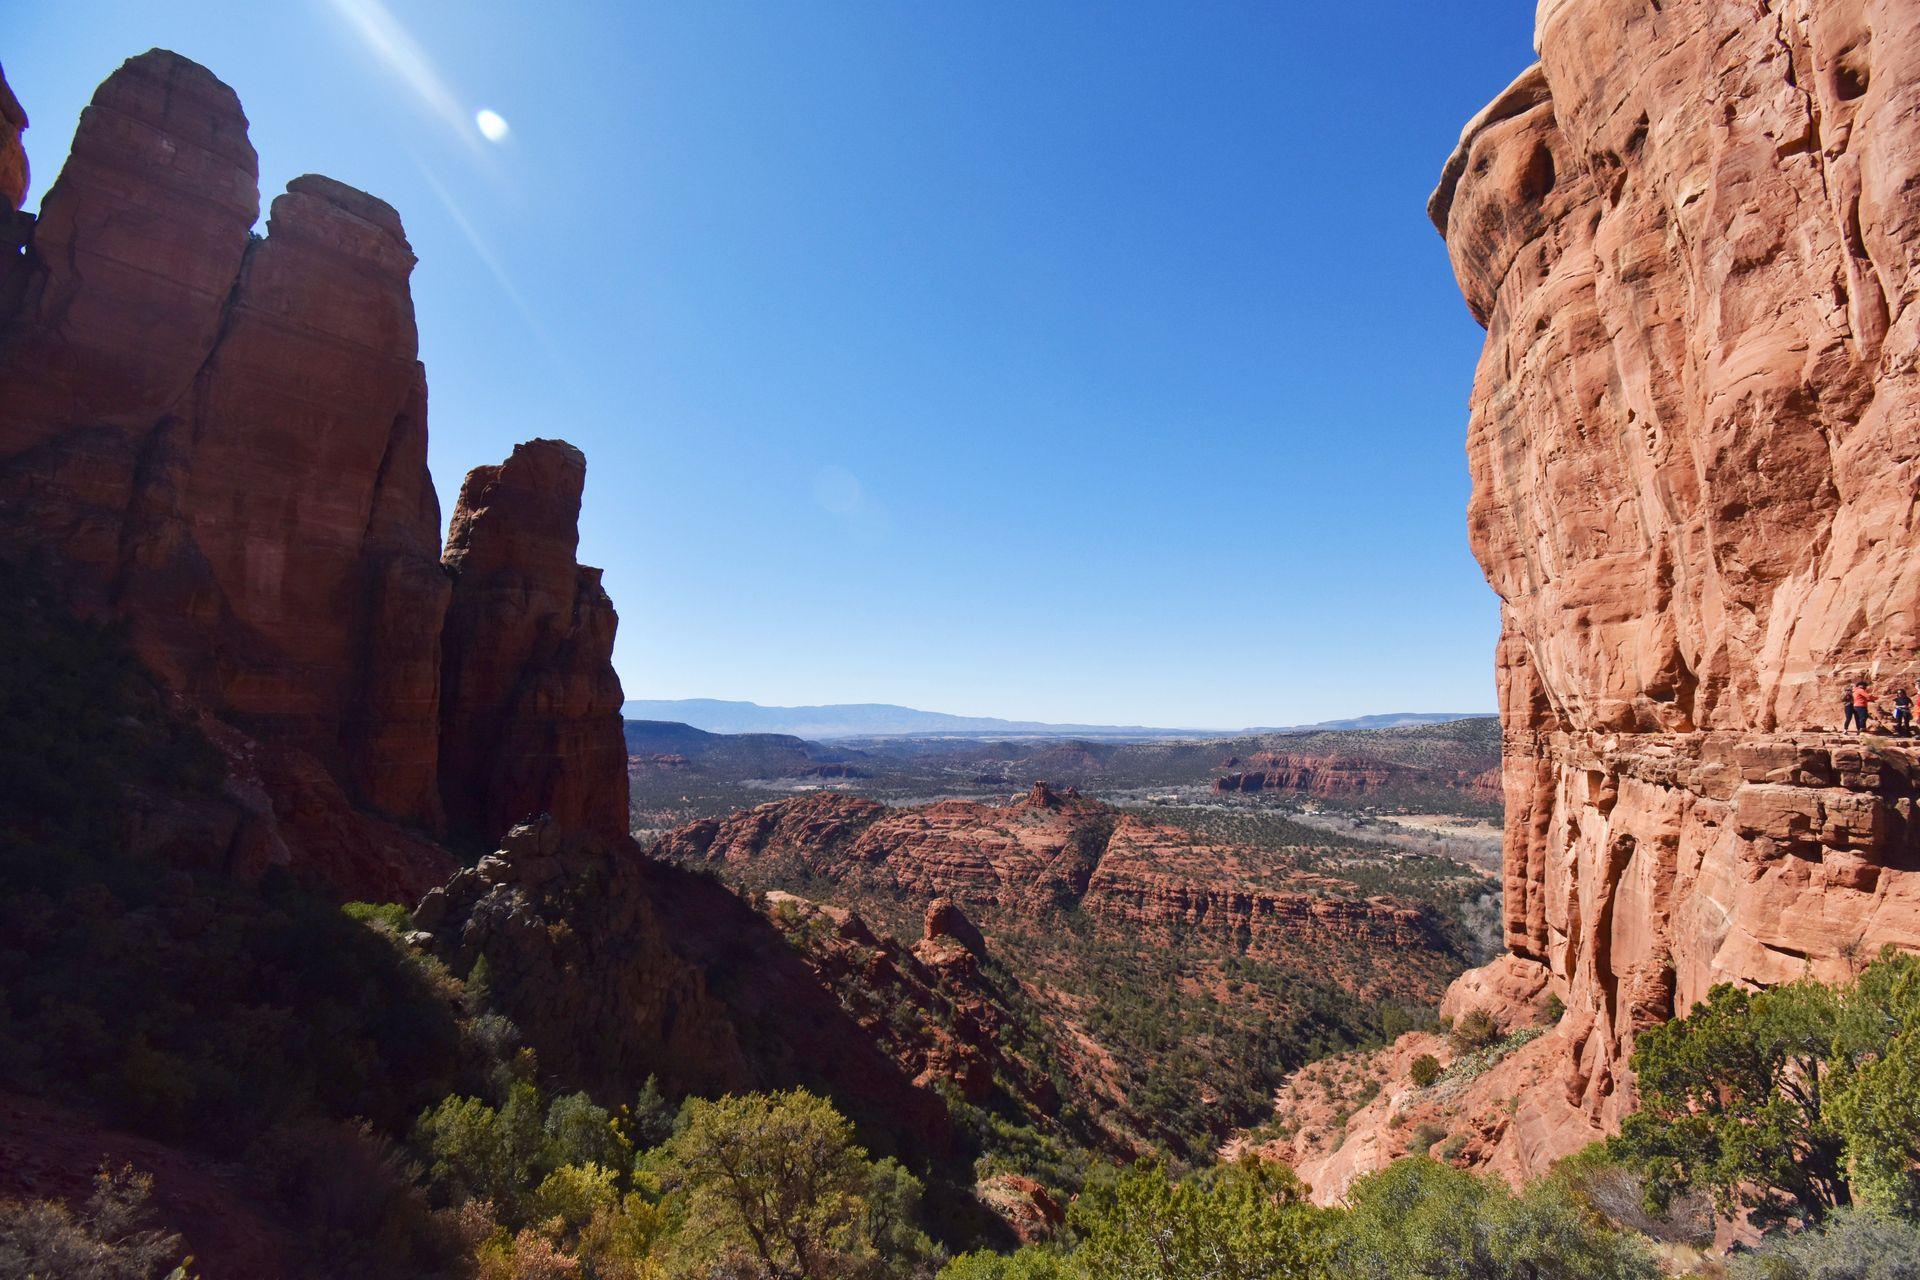 A view of two rock faces on either side with a view of a valley full of red rocks in the center.